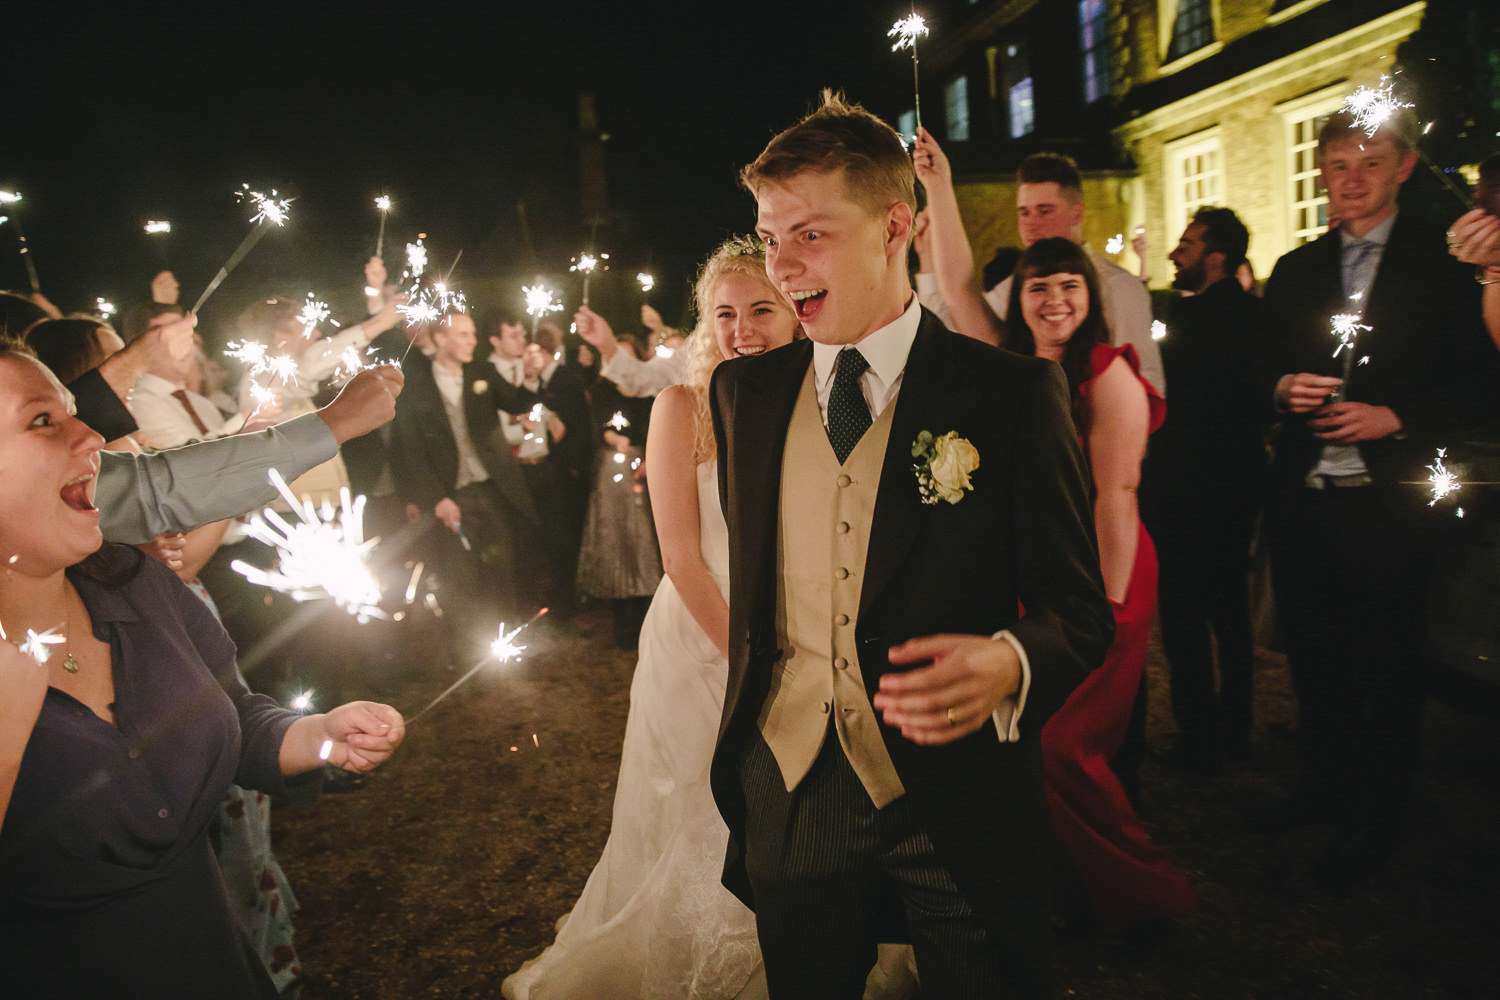 Bride and groom walk through a crowd of people holding sparklers